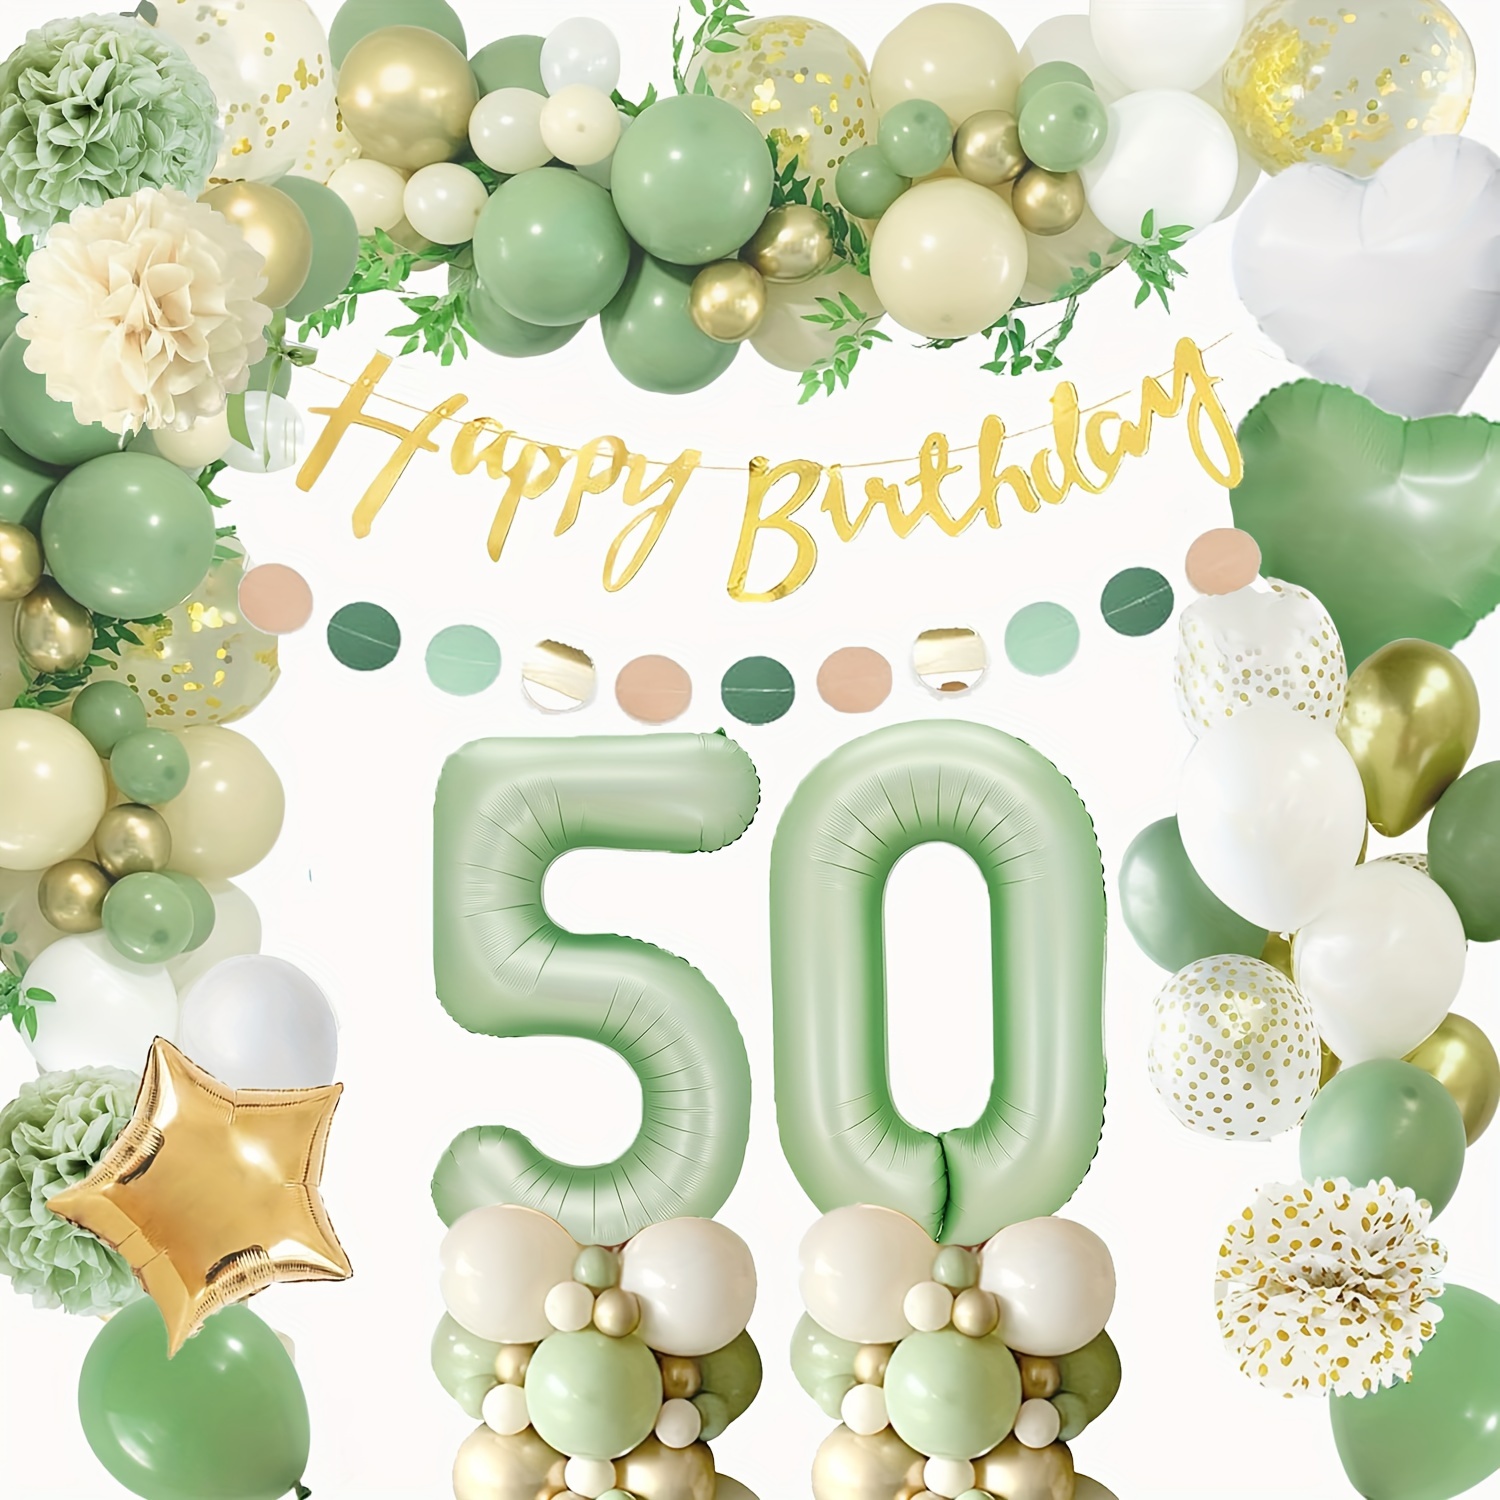 

70pcs, 50th Birthday Party Decorations For Women Men, Green Golden White And Number 50 Balloons, Happy Birthday Banner, Cake Topper, Paper Poms For 50 Birthday Party Decoration, Home Decor